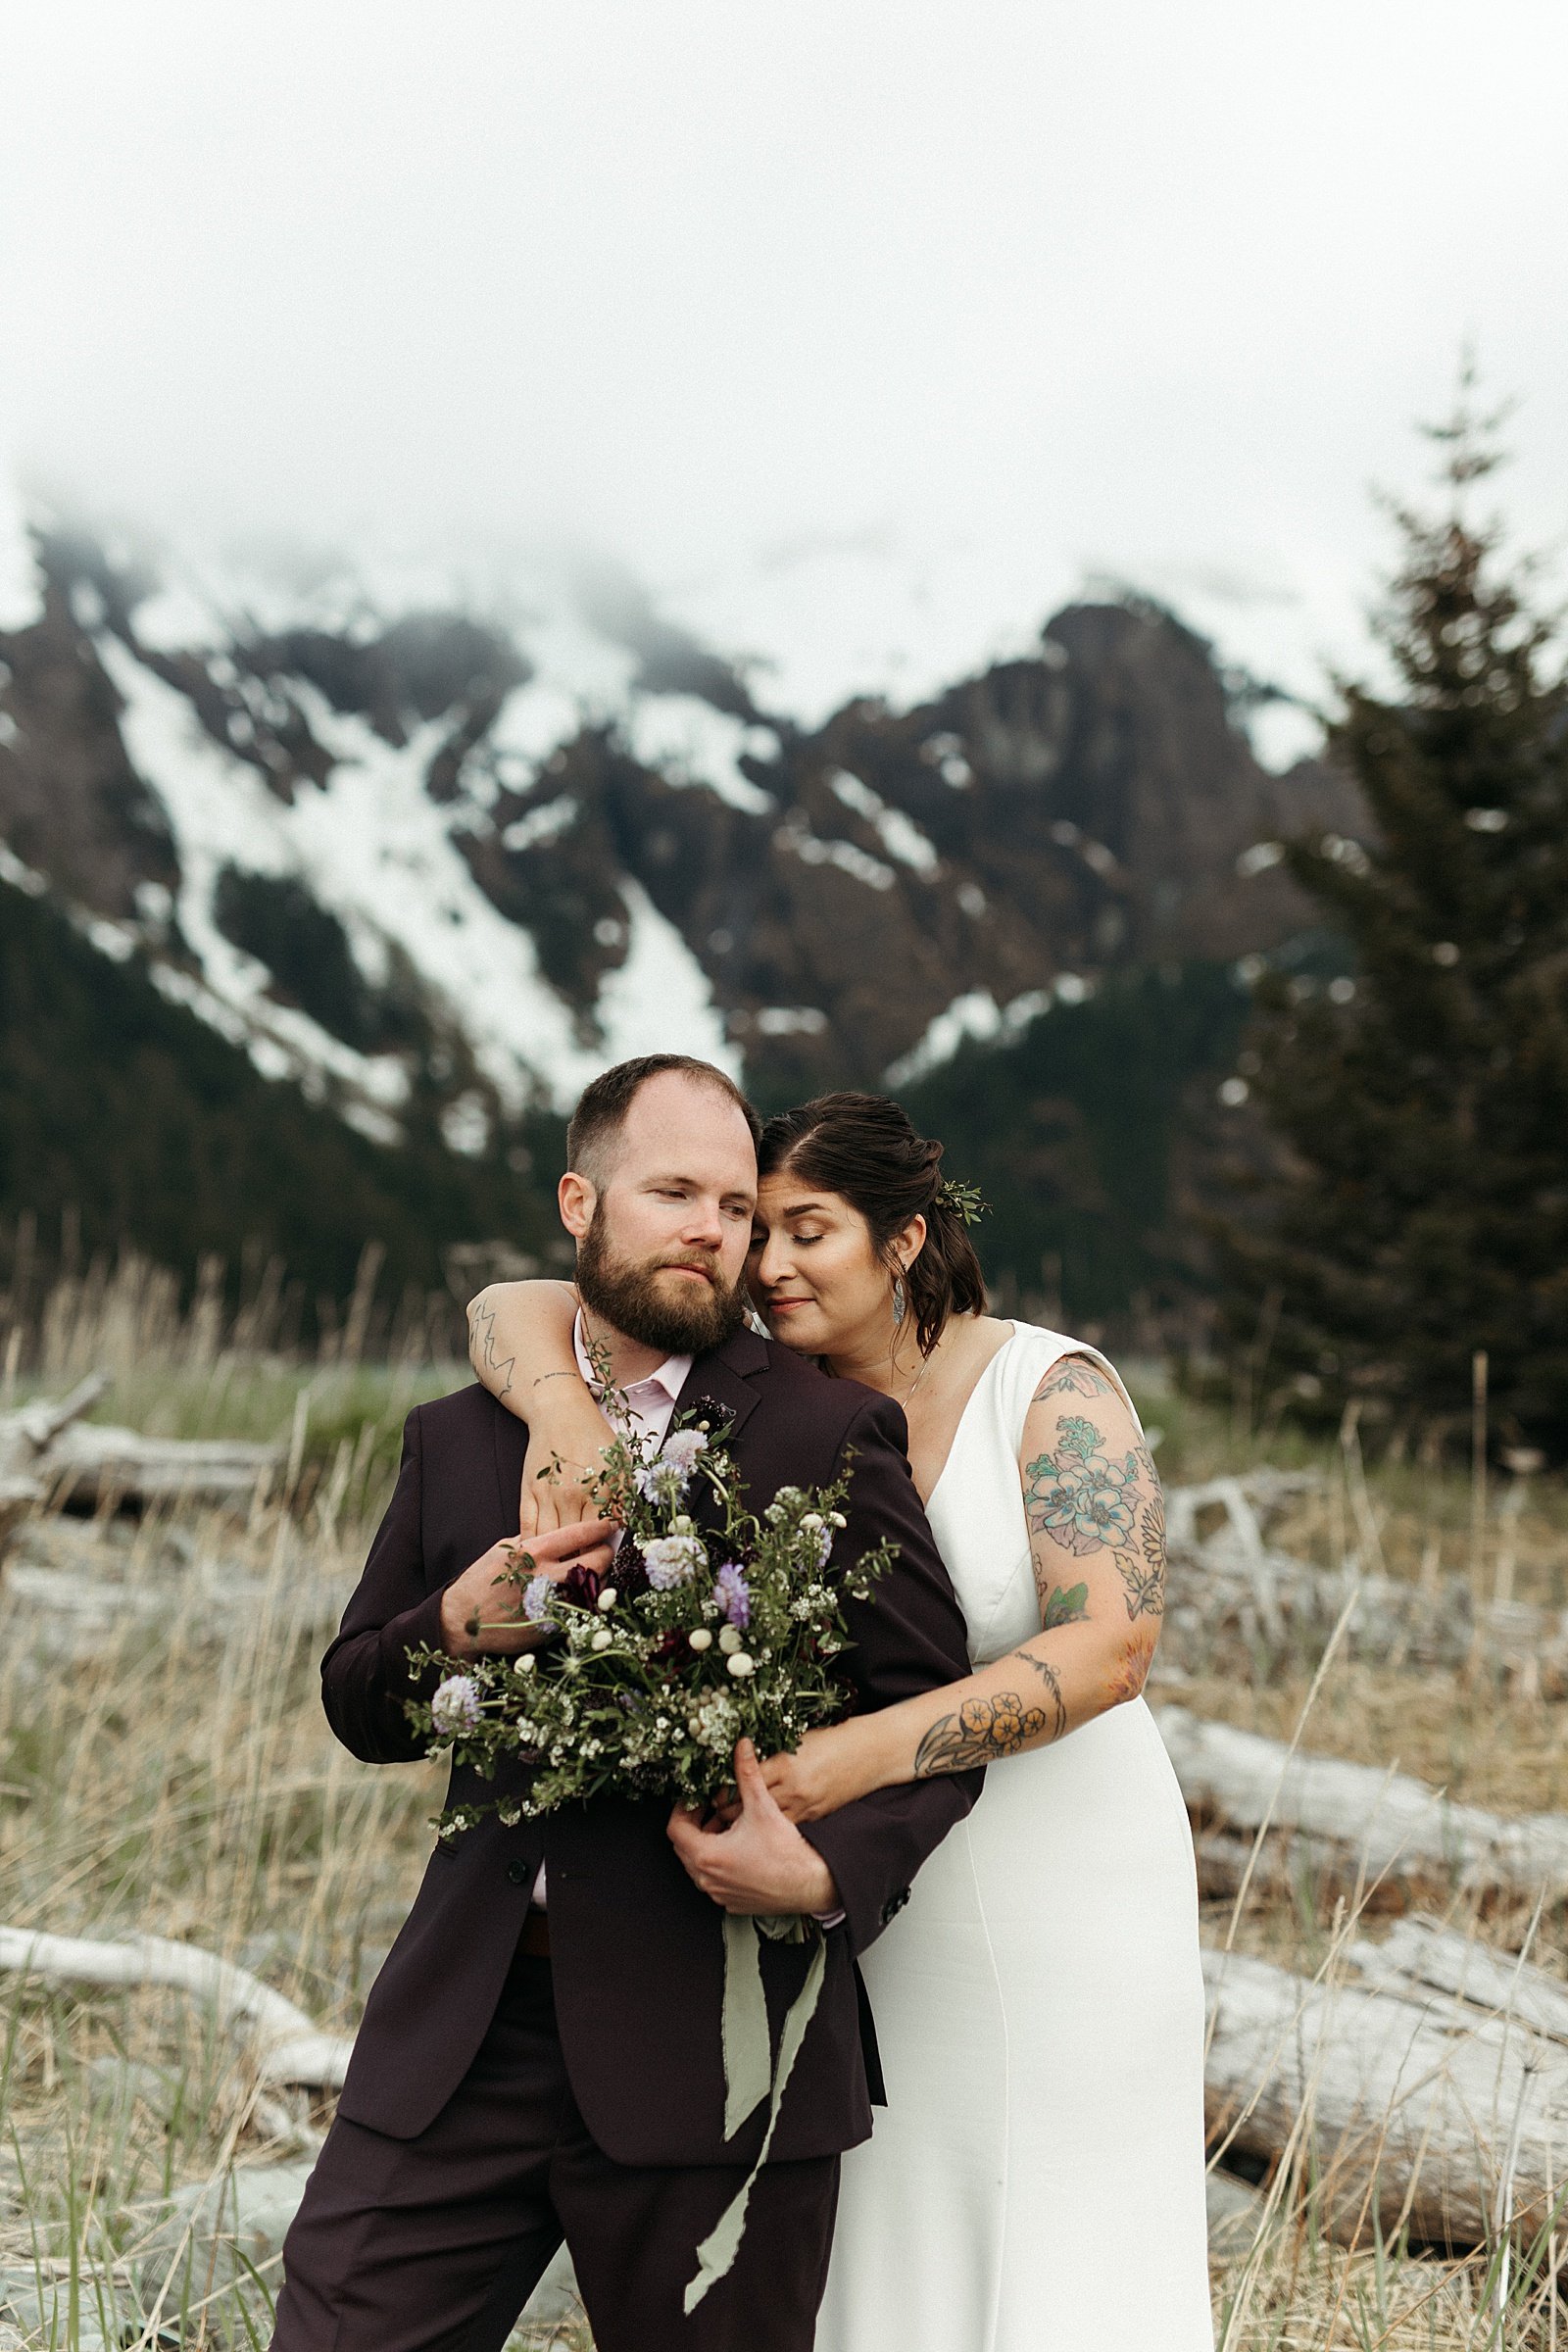  Newlyweds cuddling with mountains in the background by Rachel Struve Photography 